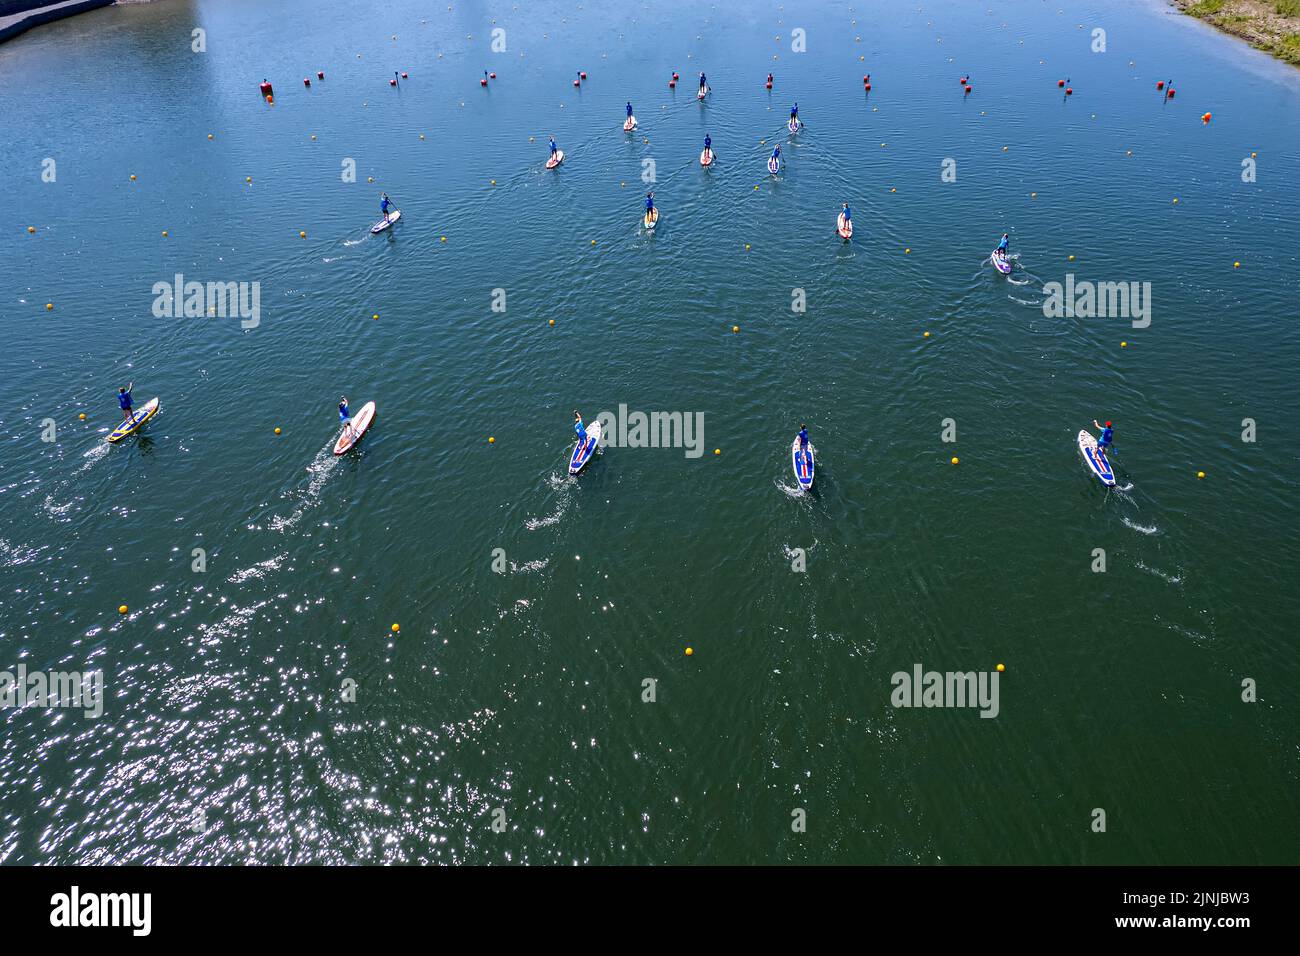 lot of people are swimming standing on the board in the water rowing with oars. Summer fun on the water. SUP on calm water. top view Stock Photo